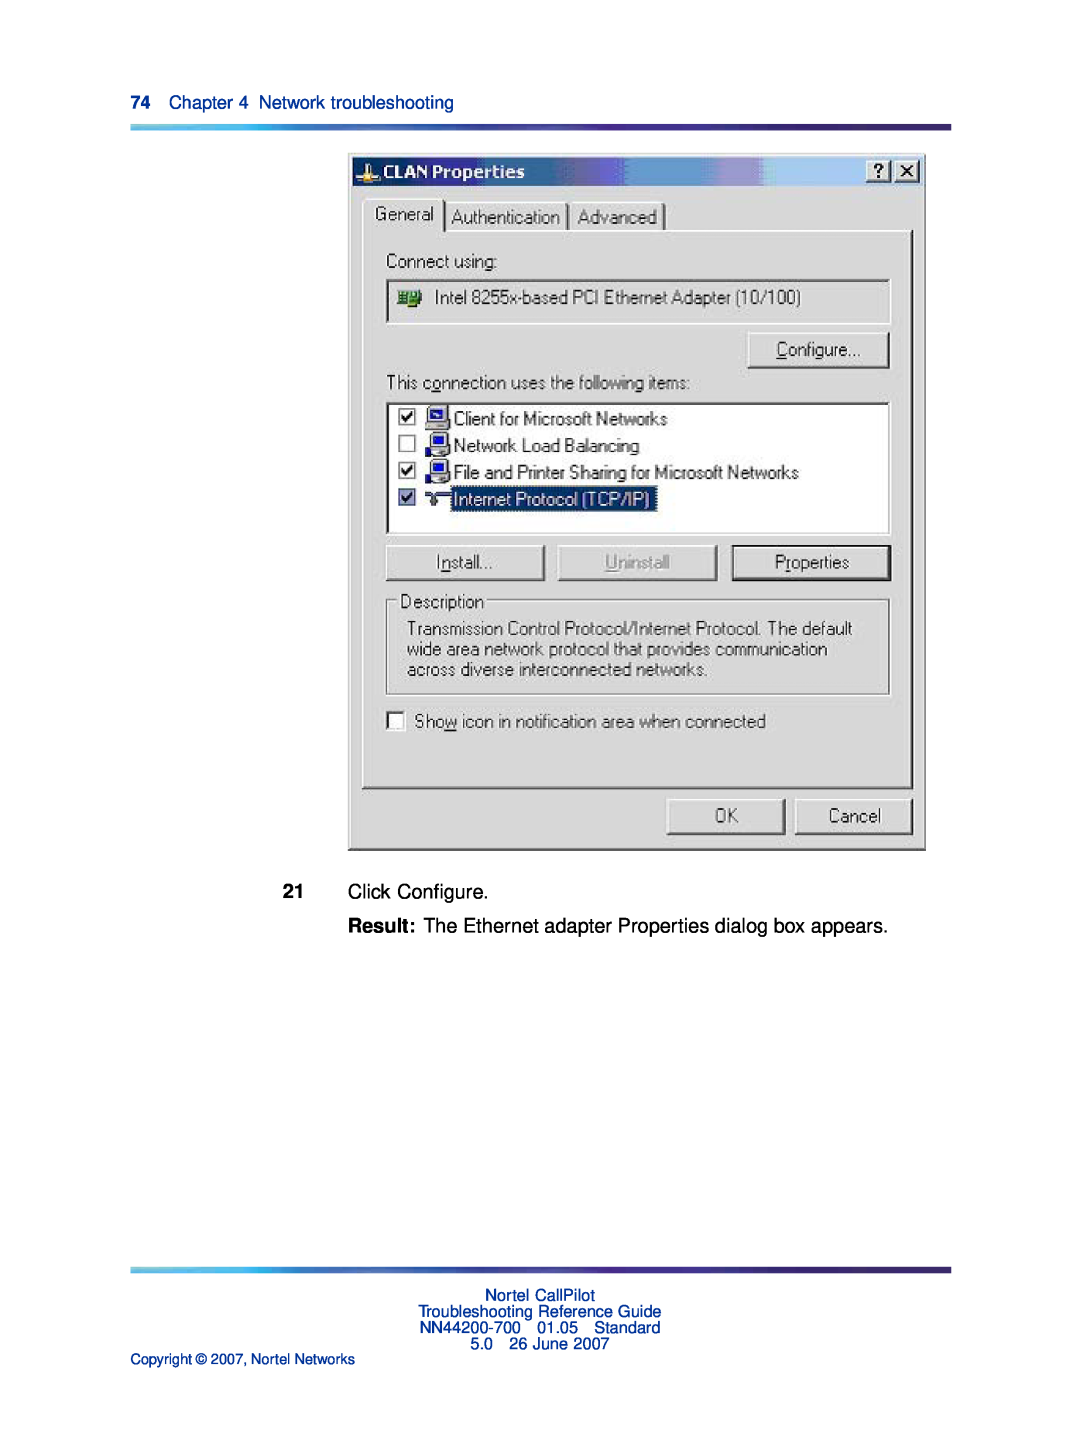 Nortel Networks NN44200-700 manual Click Conﬁgure, Result The Ethernet adapter Properties dialog box appears 